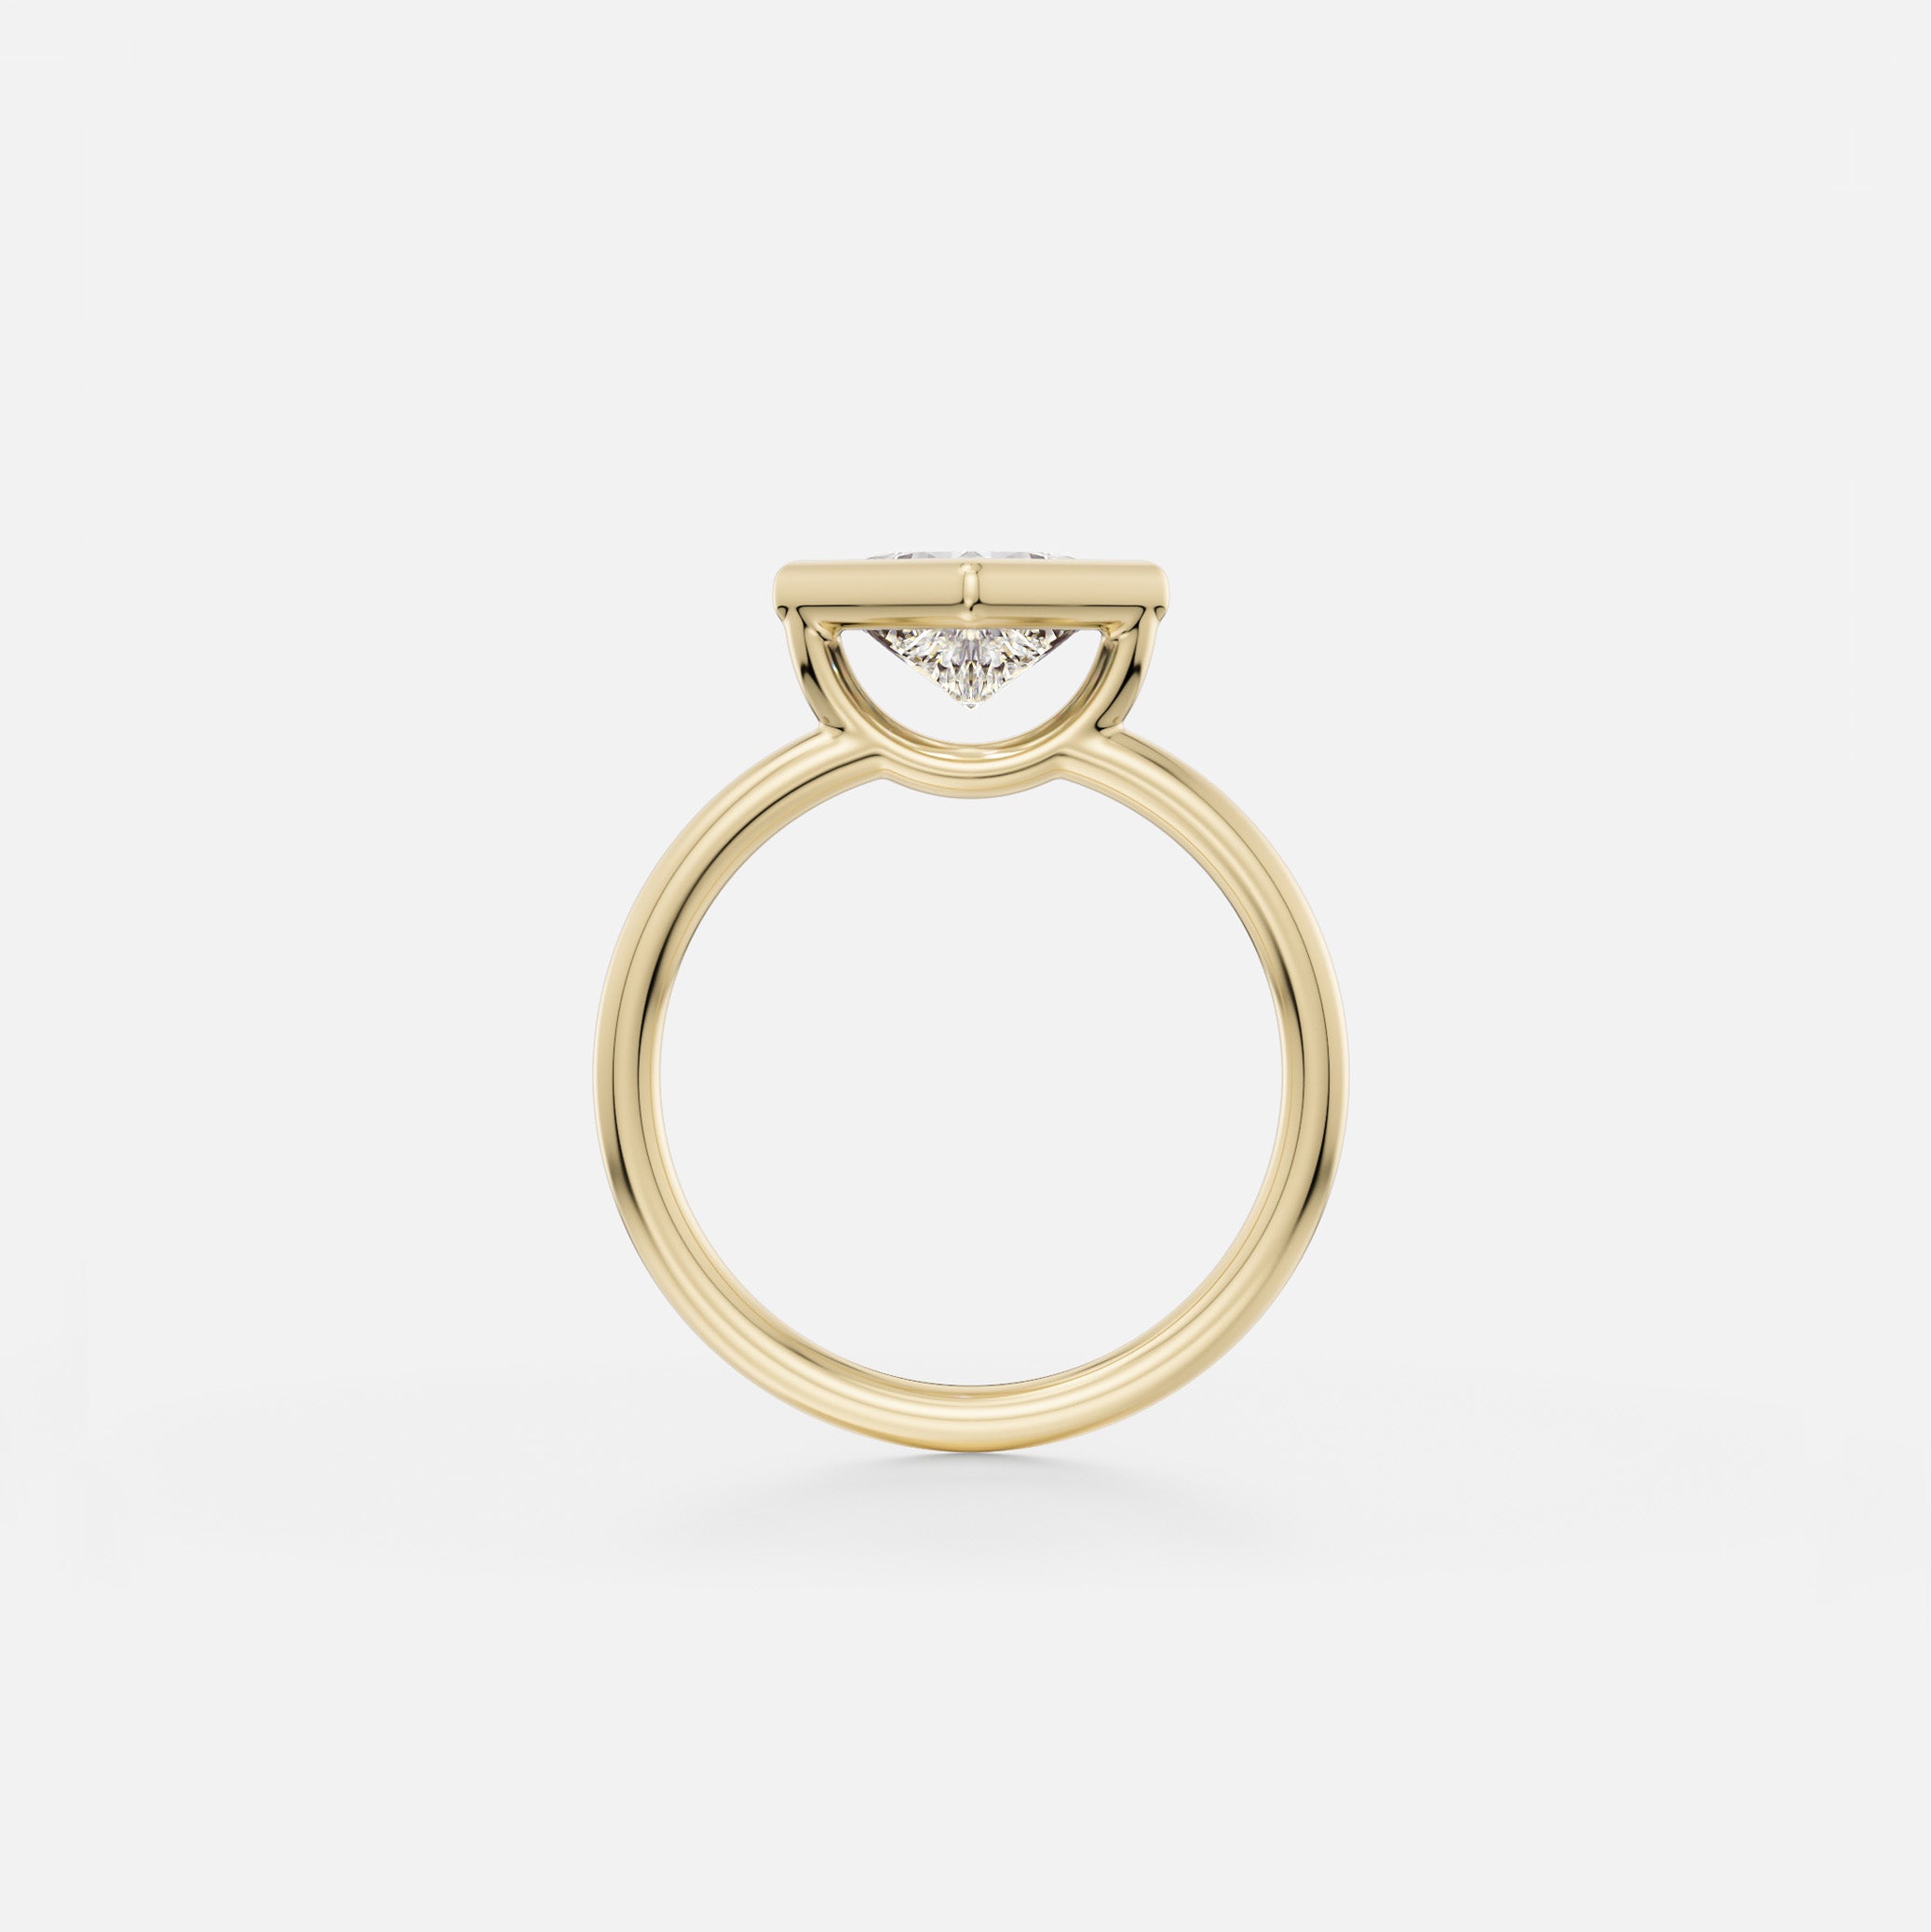 ARTI thin round band with Princess  Cut Profile Bezel Set Contemporary Minimal Diamond Precious Gemsone Engagement Ring Setting in recycled 14k Yellow Gold or platinum handcrafted by SHW Fine Jewelry NYC